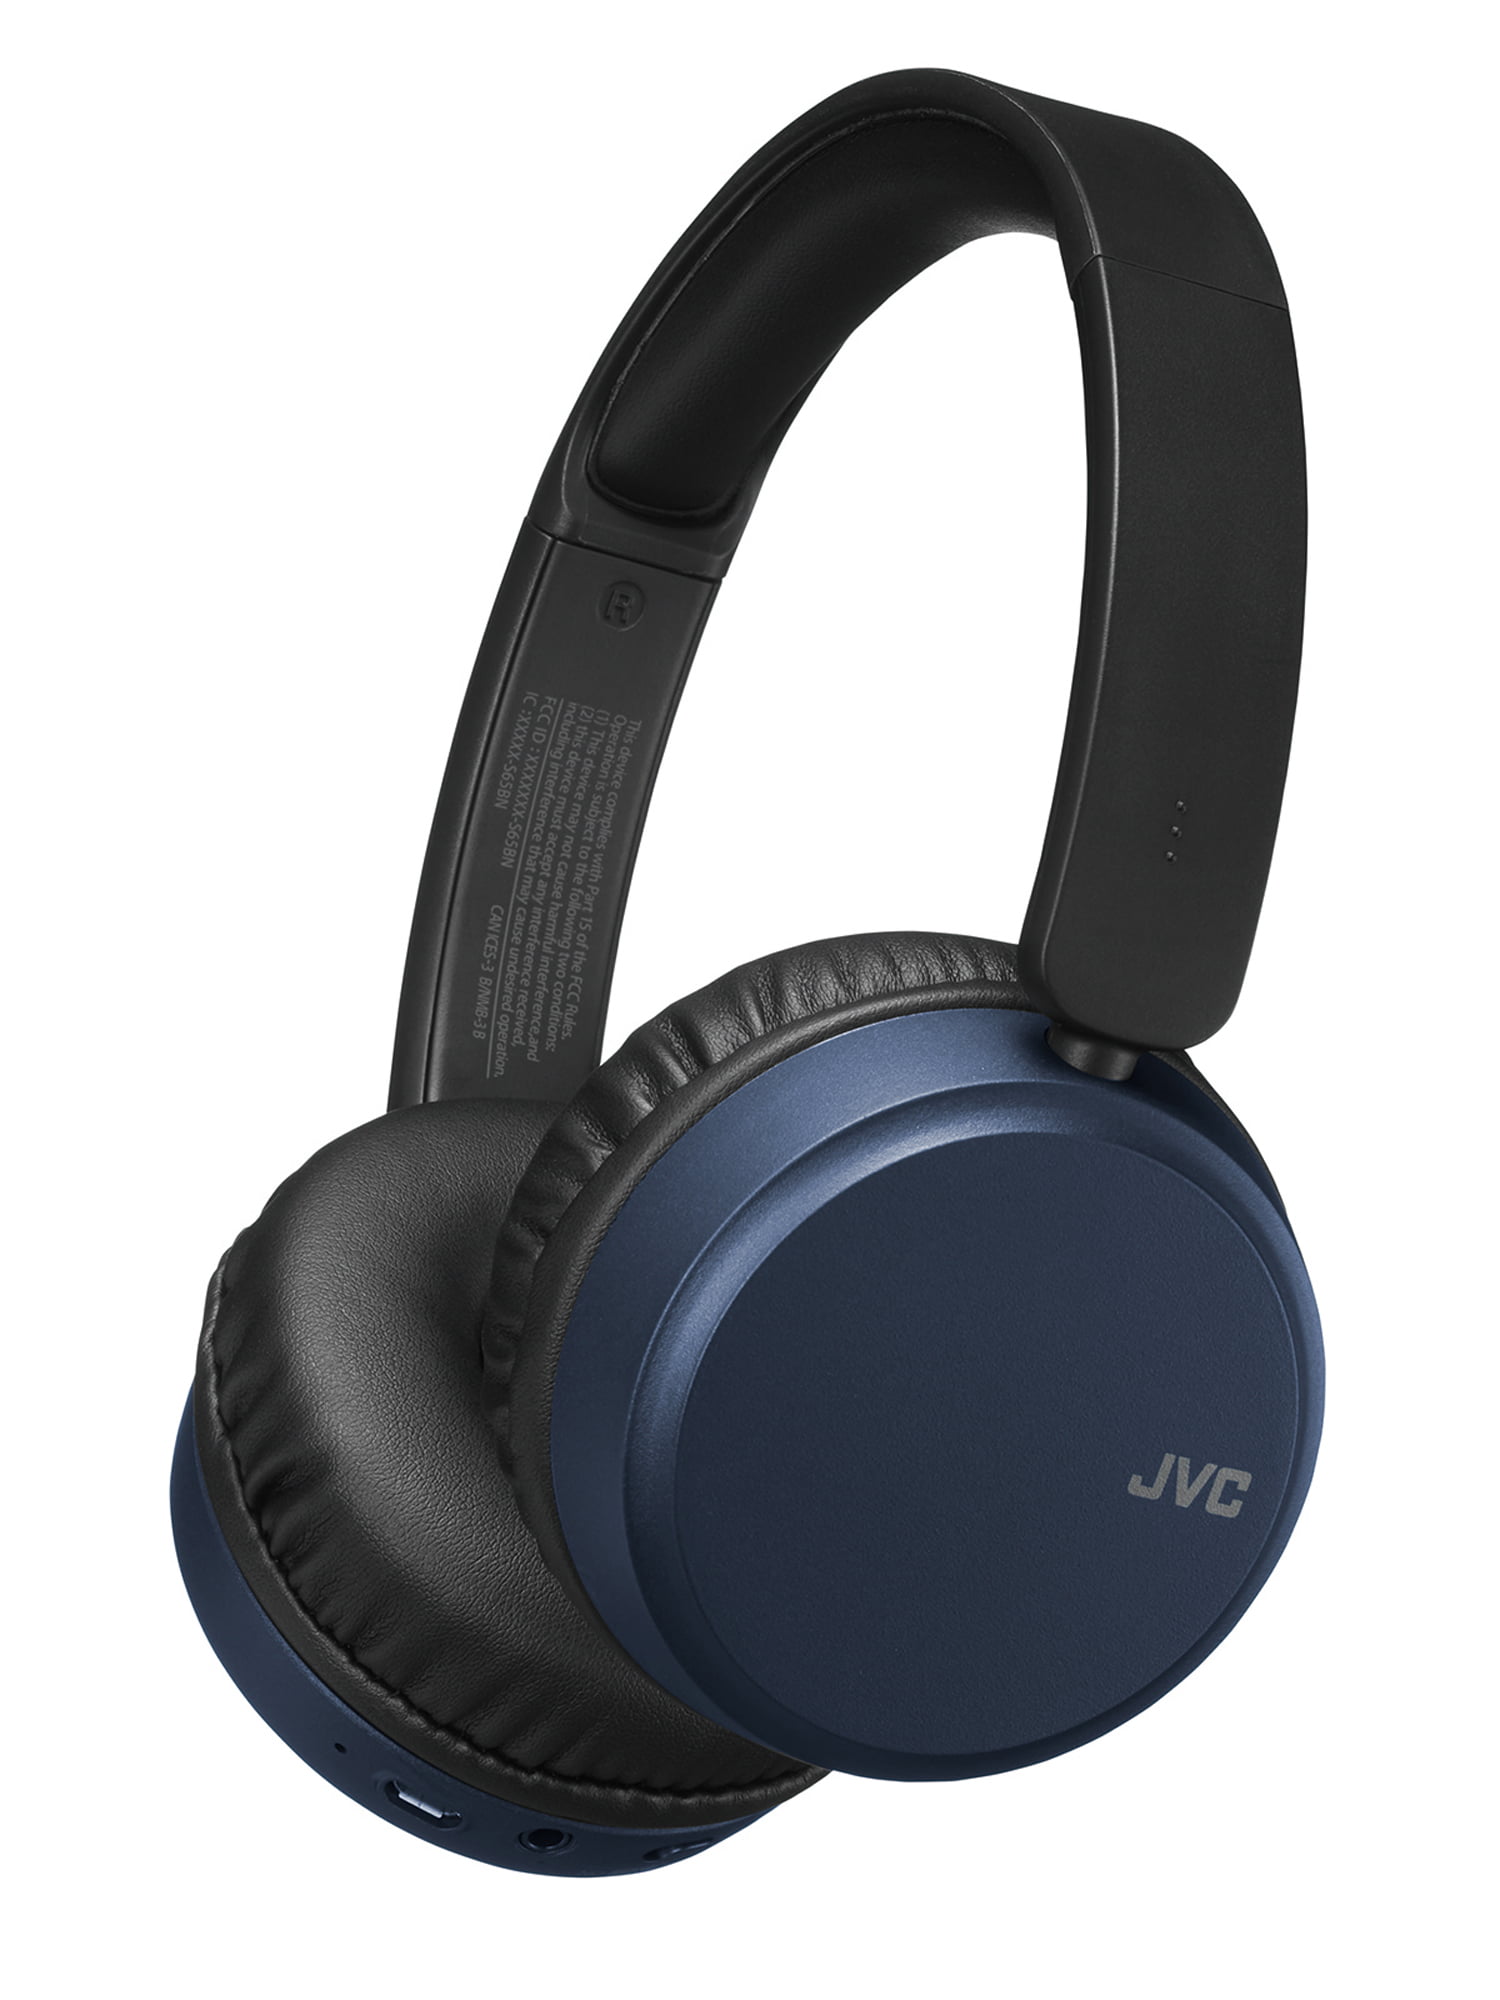 JVC Noise Cancelling Wireless Headpones, Bluetooth 4.1, Bass Boost Function  - HAS65BNA (Blue)